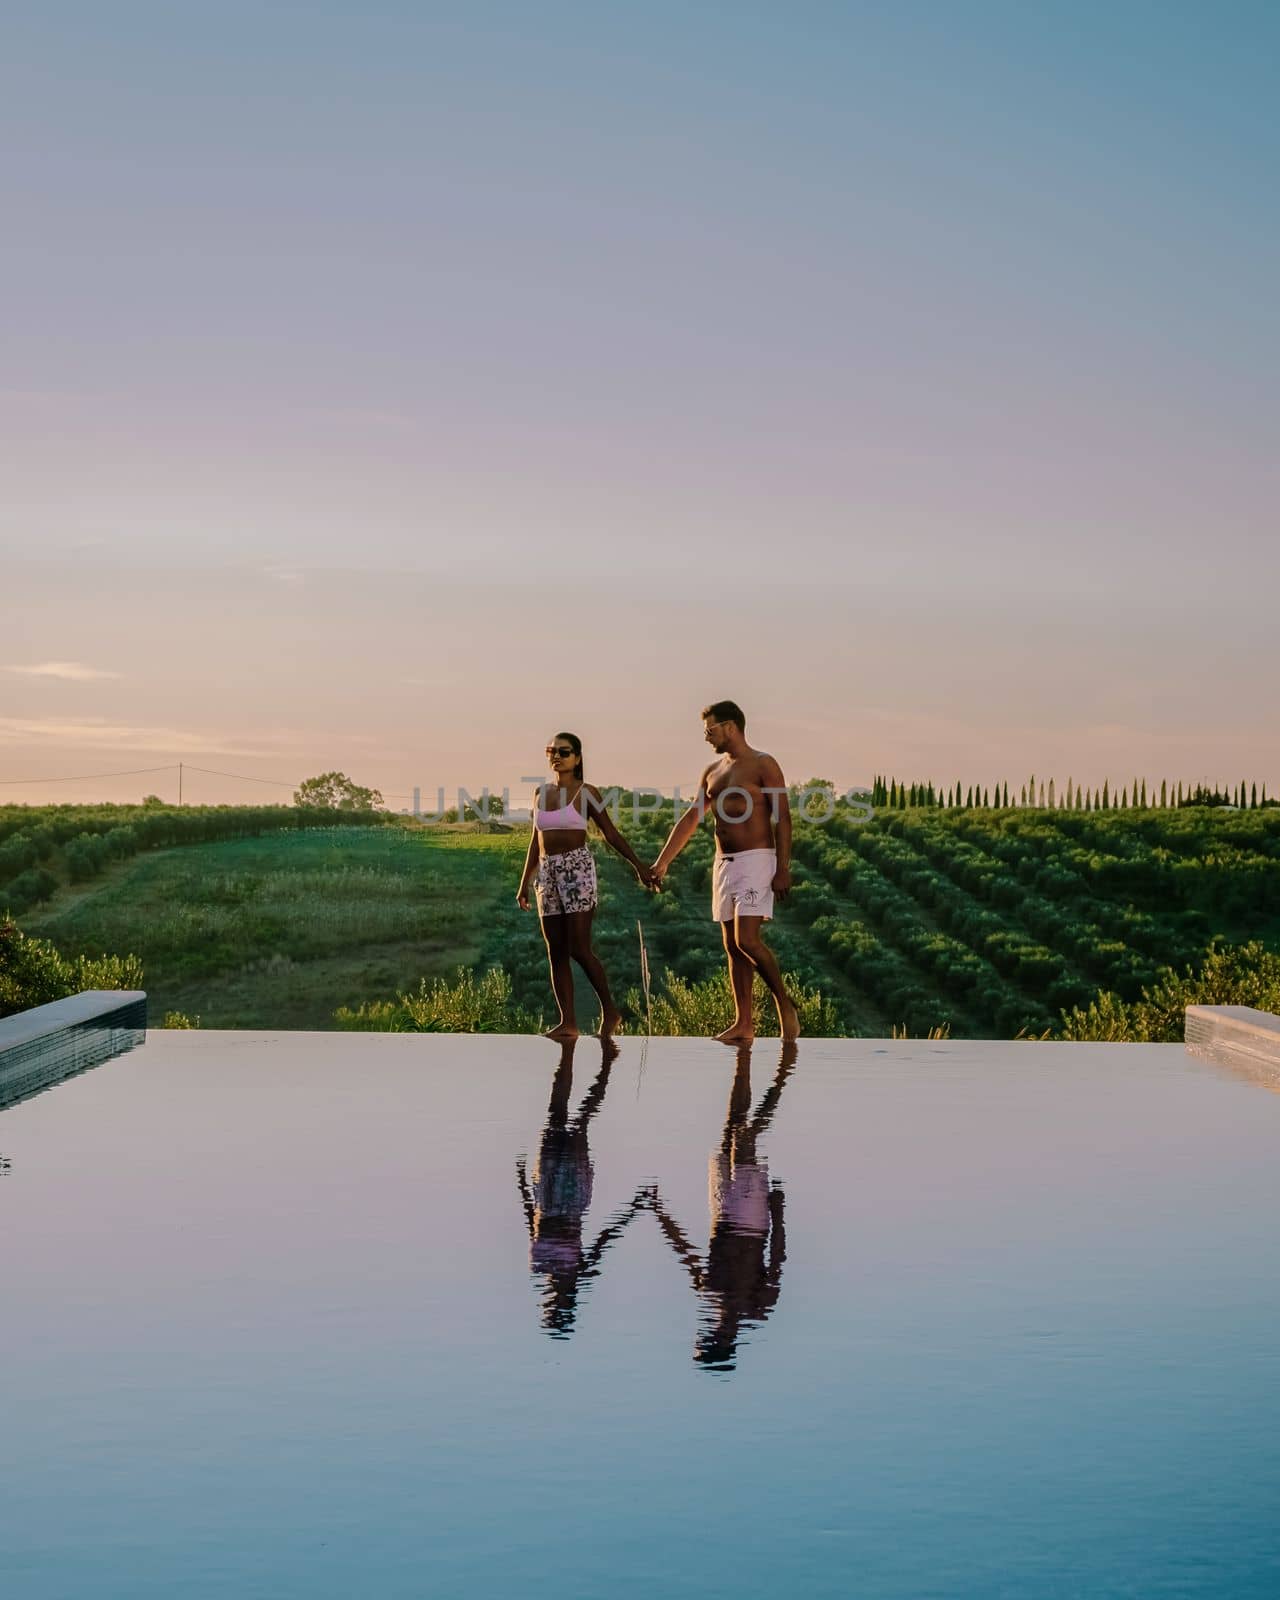 Couple at a Luxury resort swimming pool with a view over wine fields at sunset in Sicily Italy.